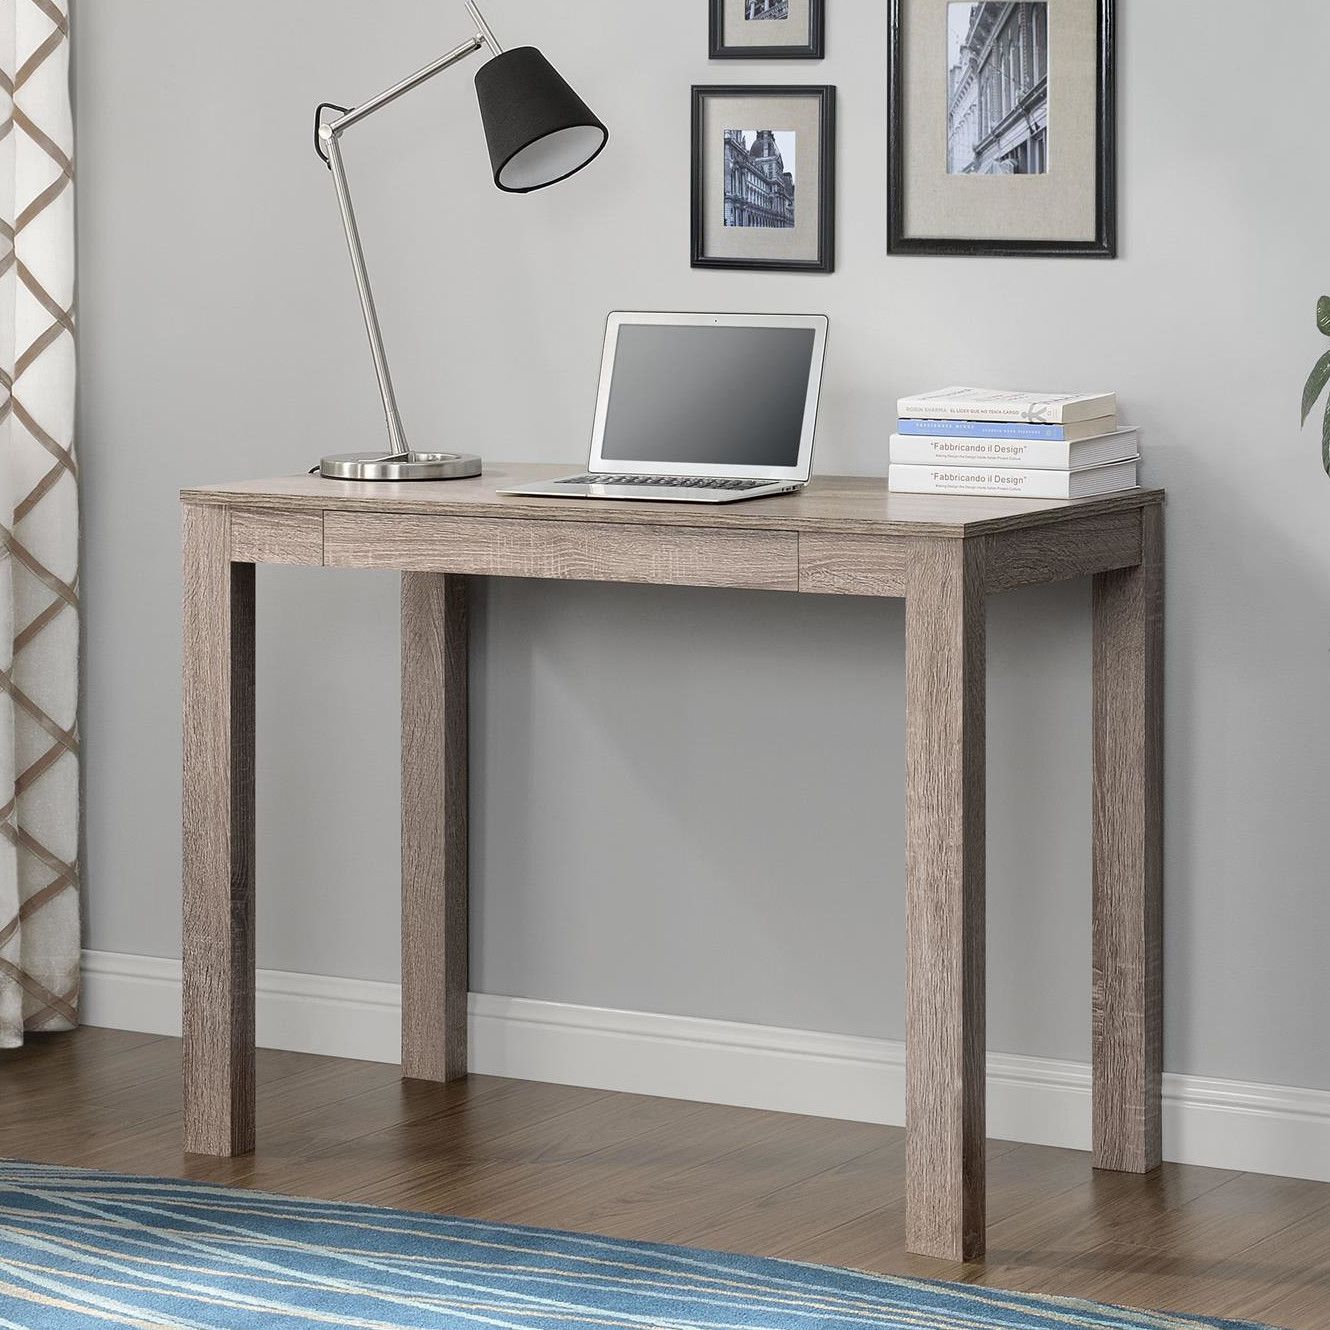 Altra Furniture Parsons Writing Desk With Drawer | Writing Desk With Inside Sonoma Oak 2 Tone Writing Desks (View 4 of 15)